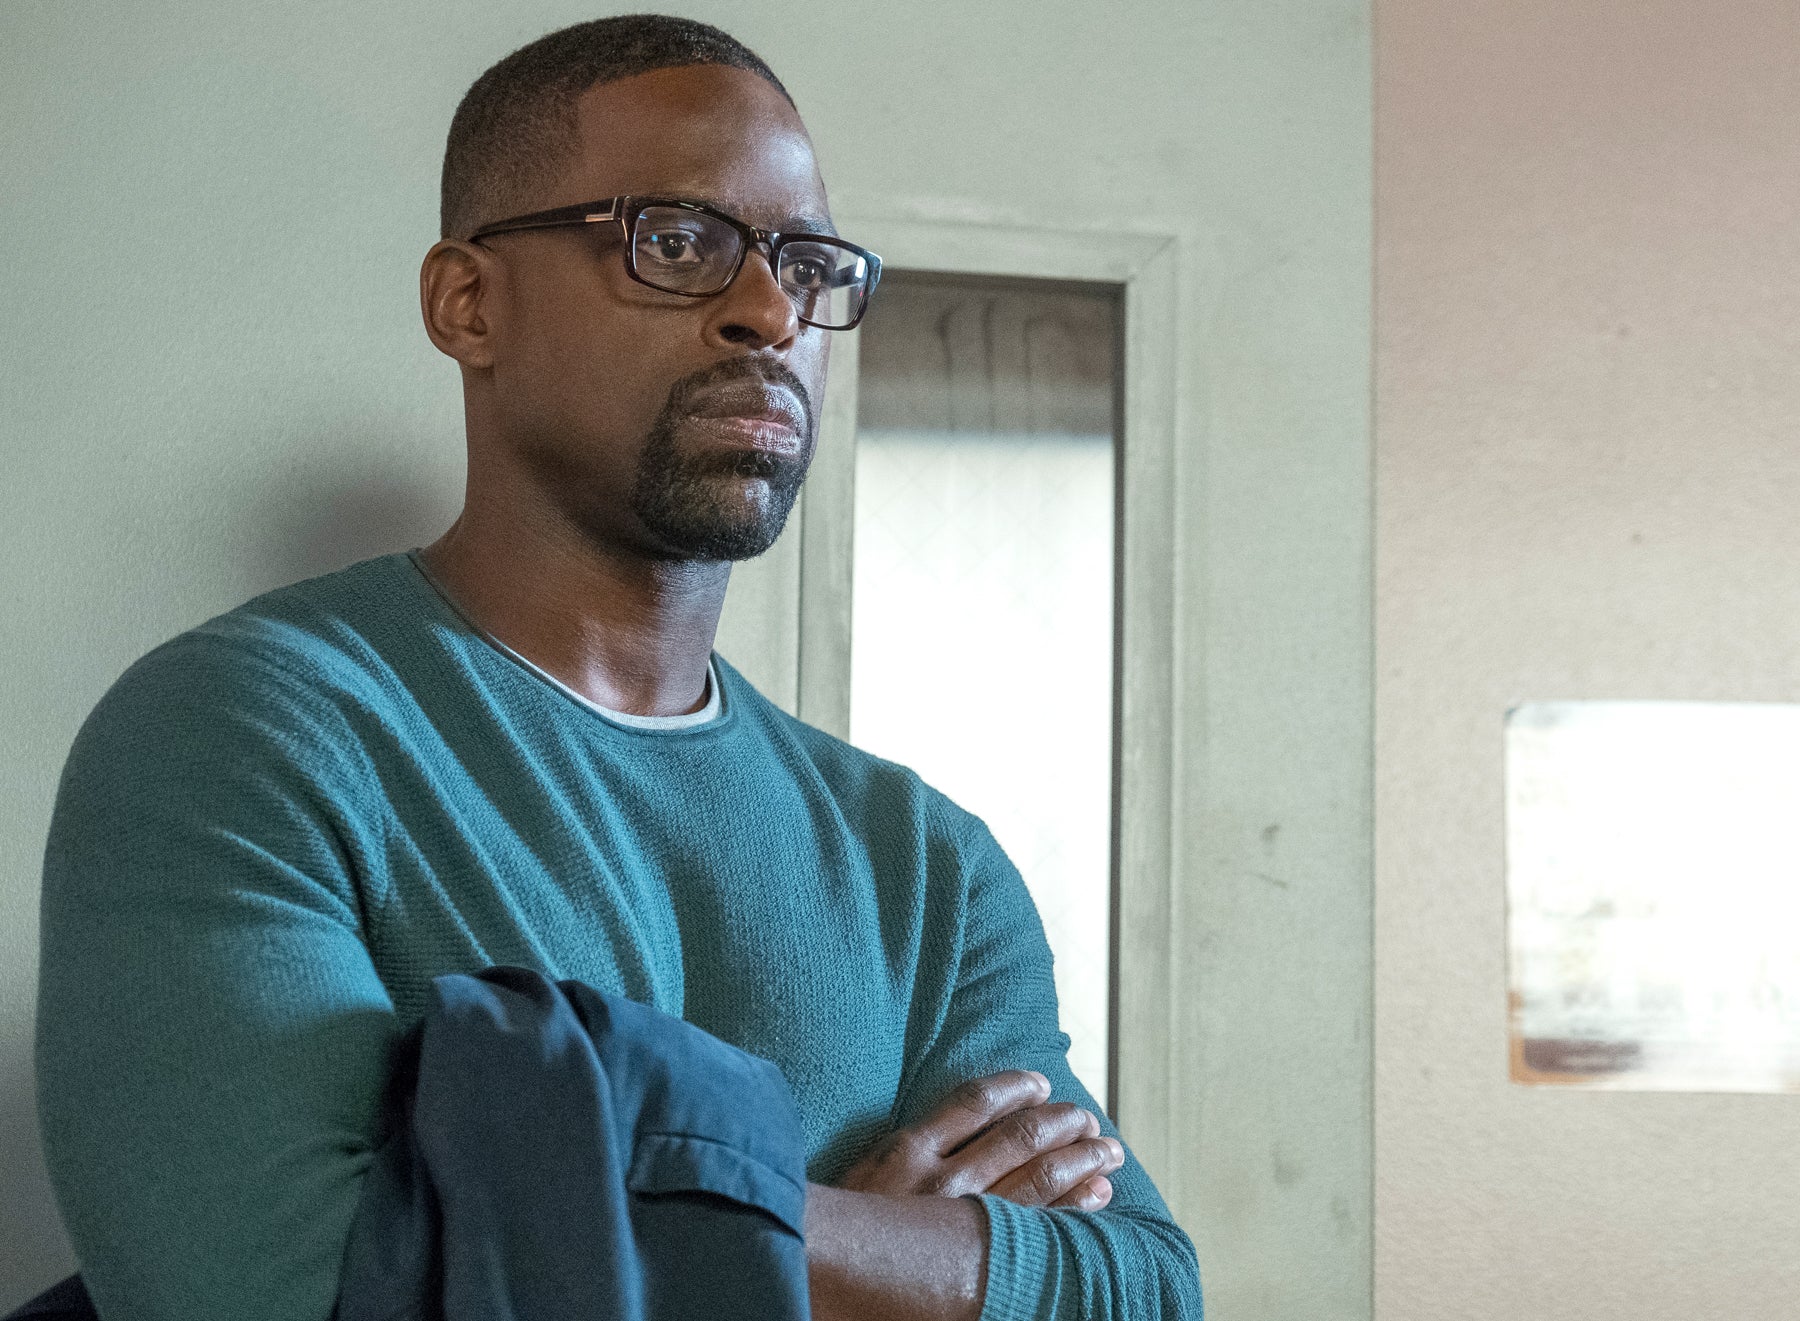 Randall Pearson (Sterling K. Brown) stands leaning against a mint door, looking off camera with a serious expression in an episode of This Is Us.